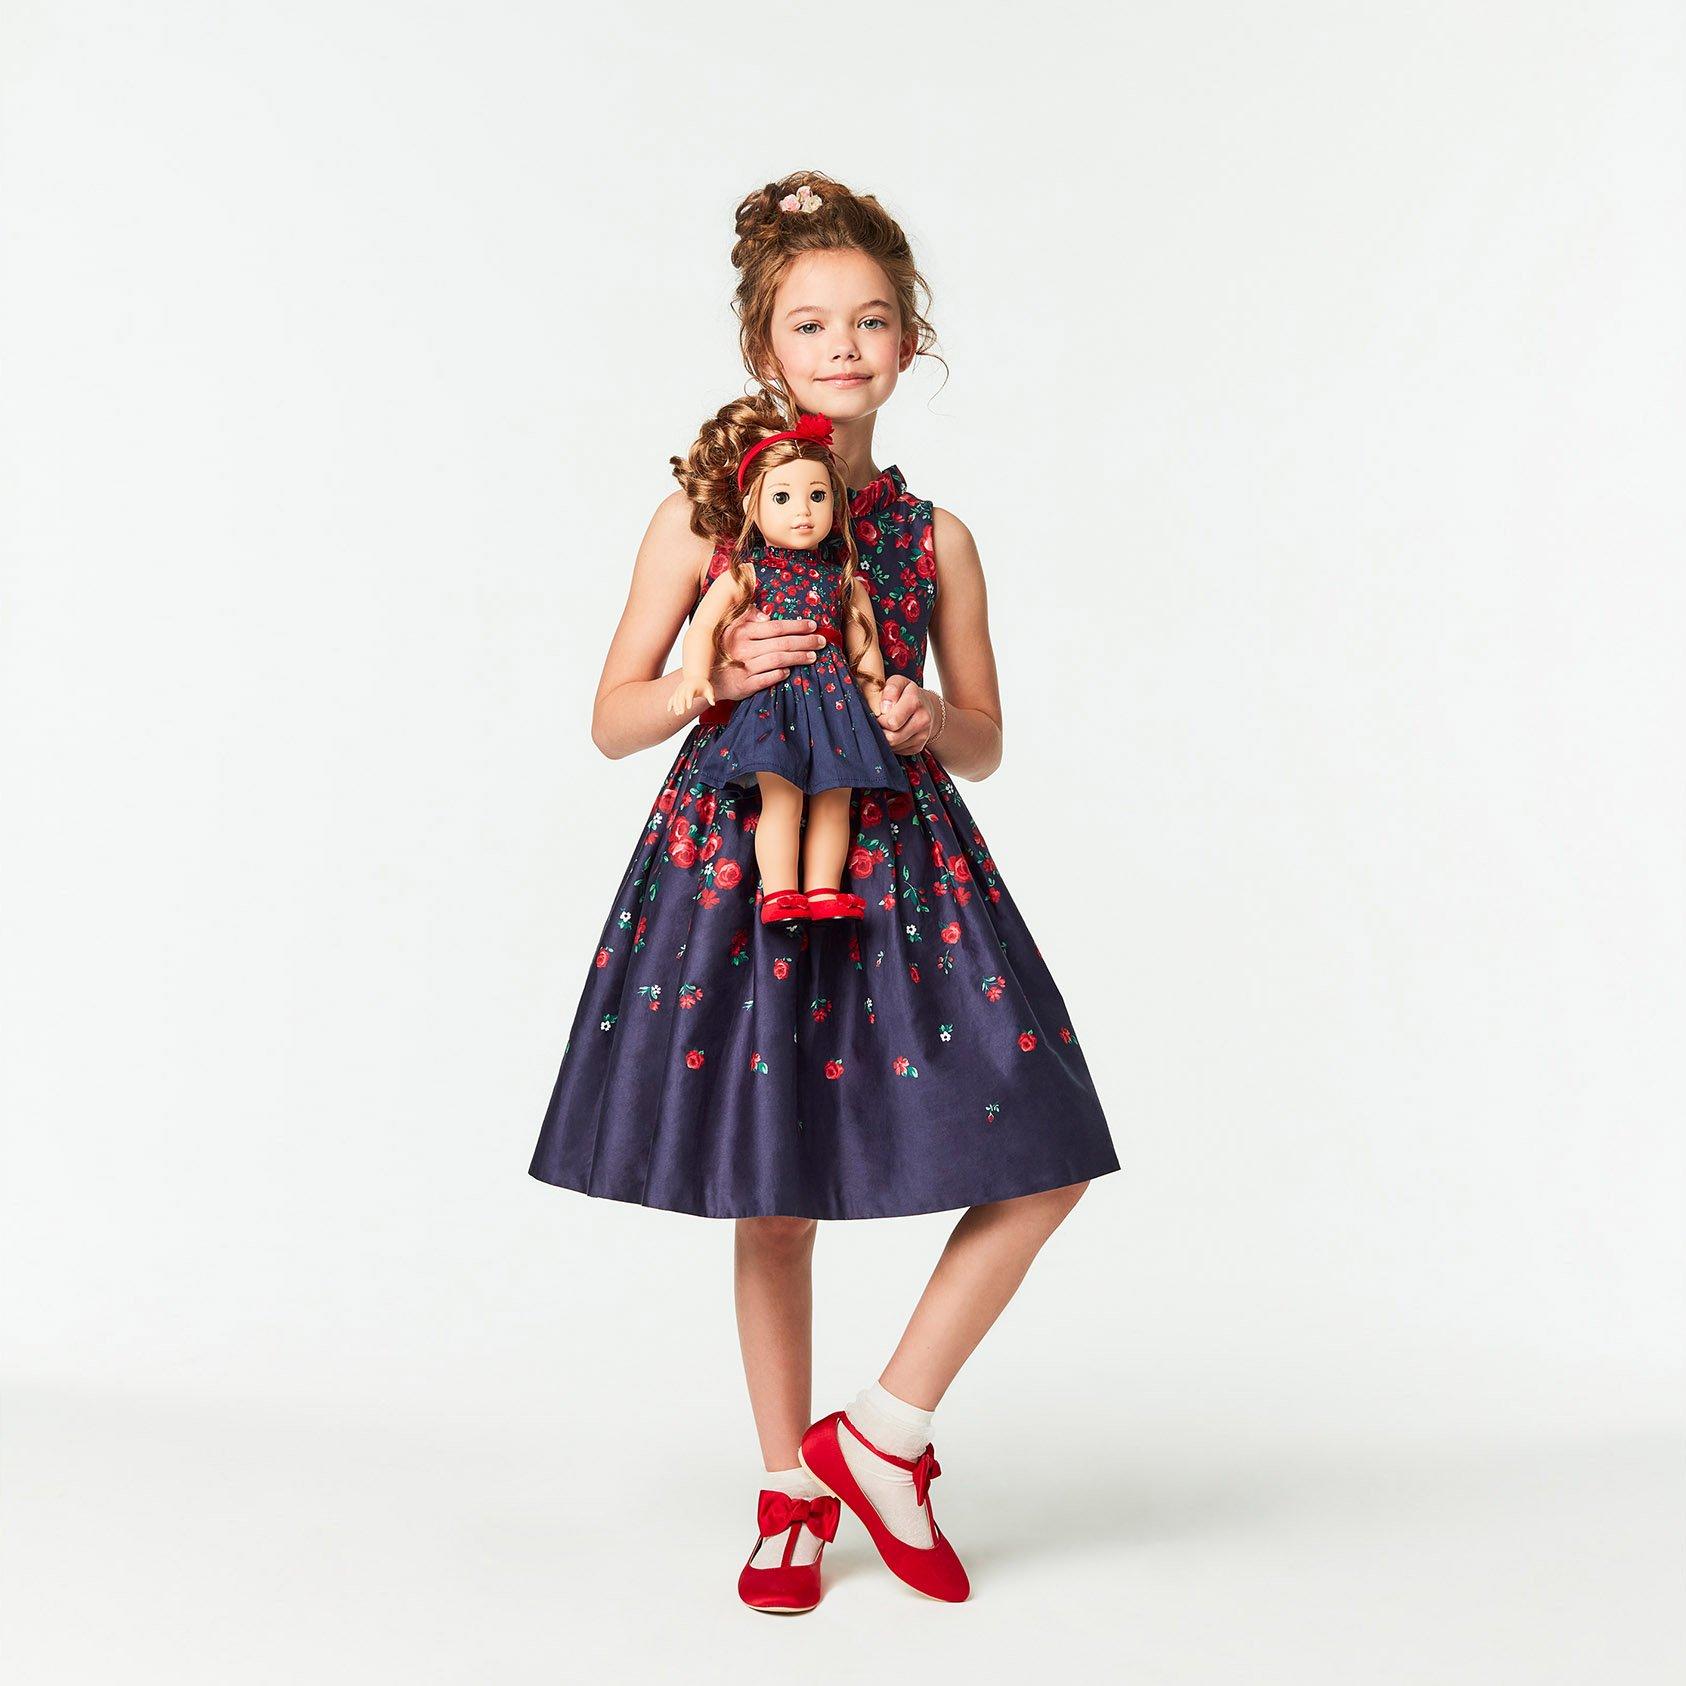 American Girl® Matching Looks for Girl & Doll Bundle